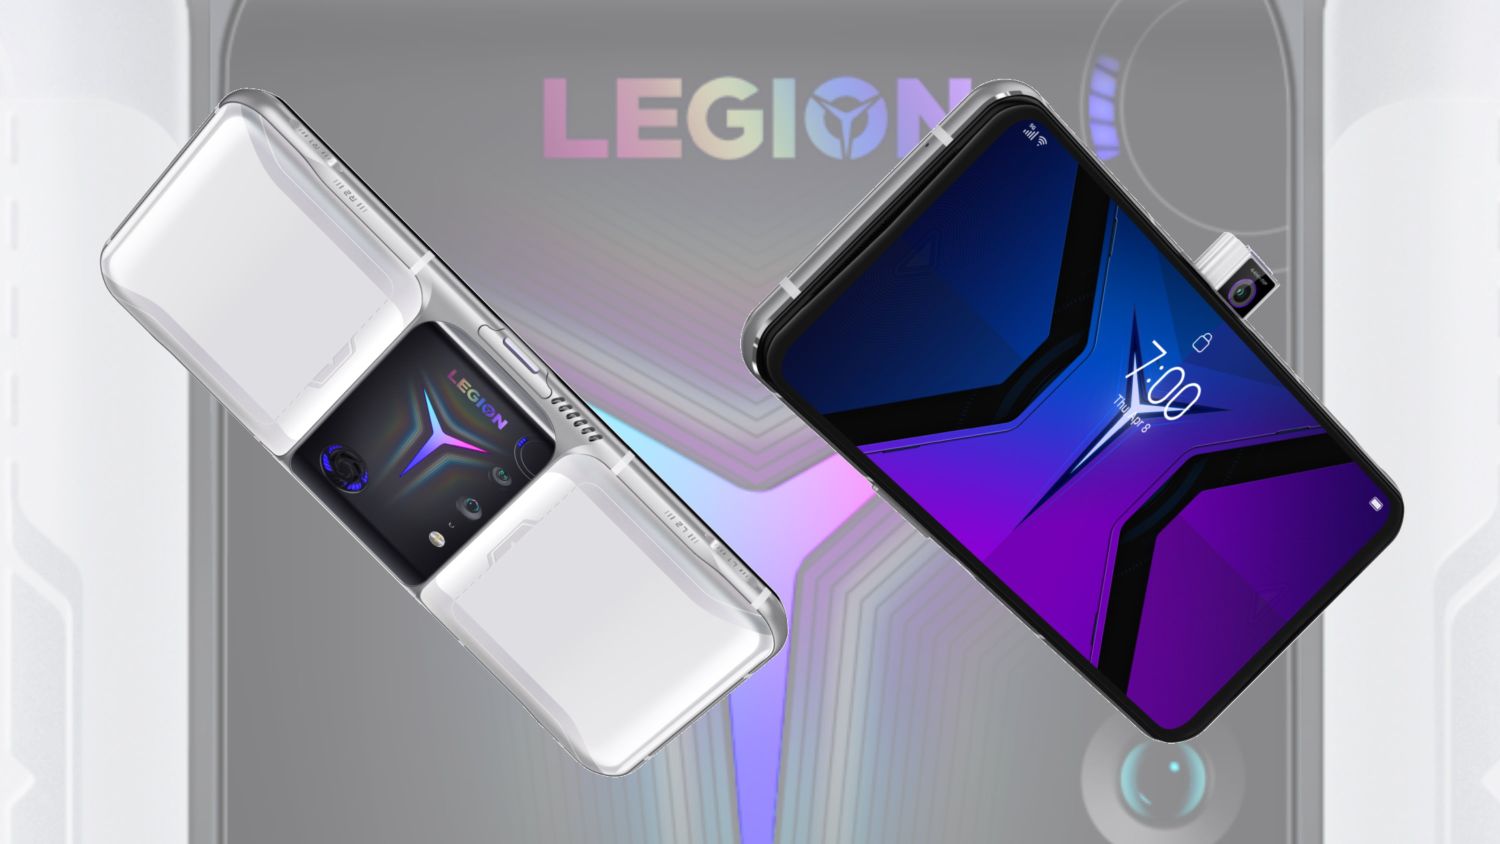 Lenovo is calling it quits on its Legion gaming smartphone business